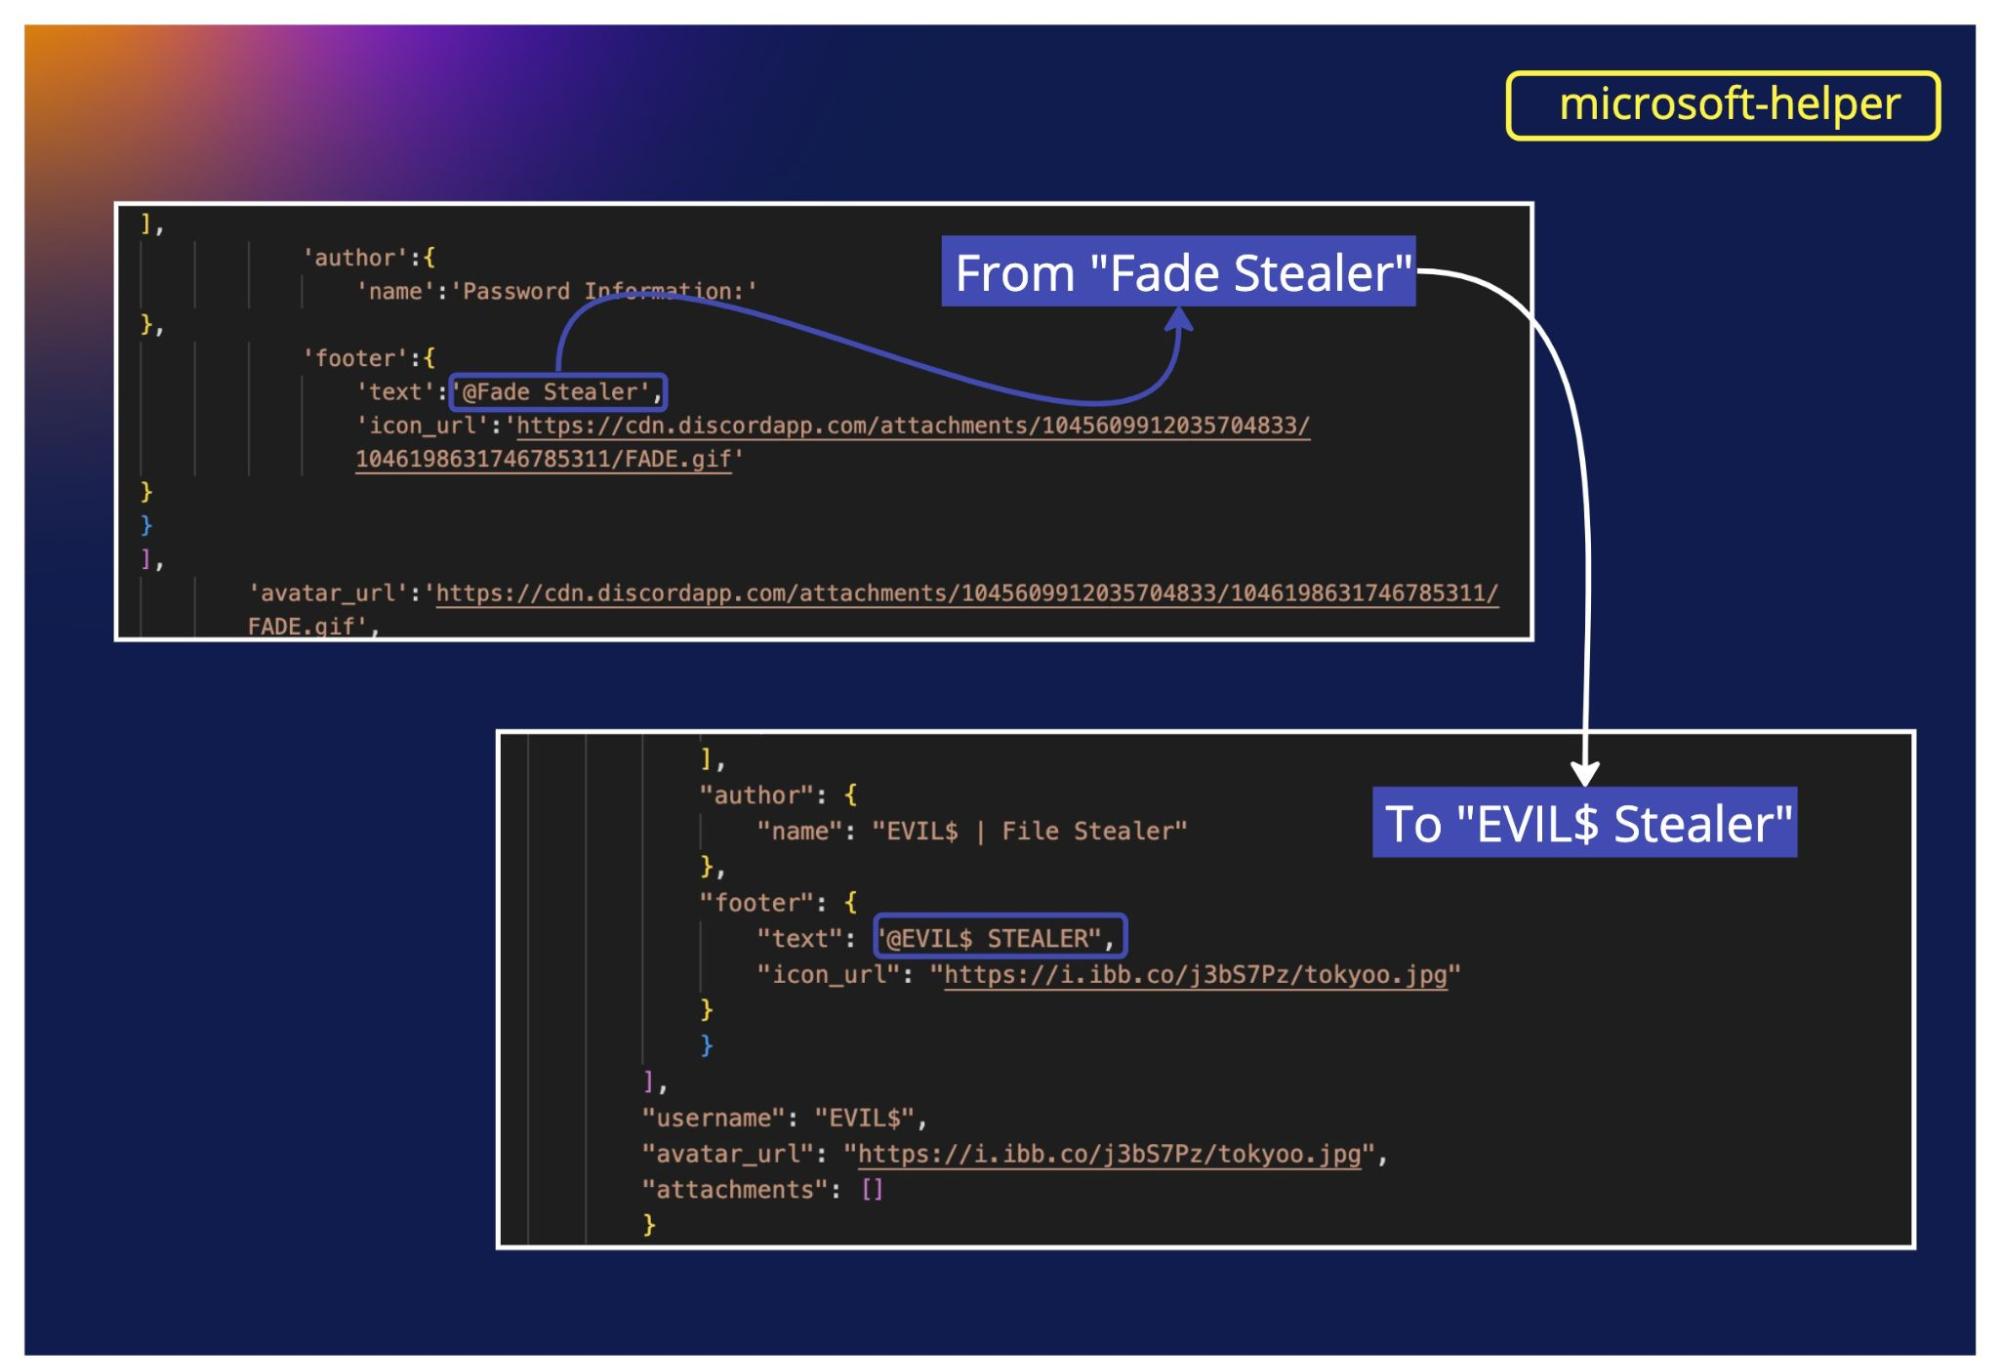 A screenshot of the microsoft-helper package highlighting how the copycat W4SP stealer "Fade Stealer" was modified to "EVIL$ Stealer".